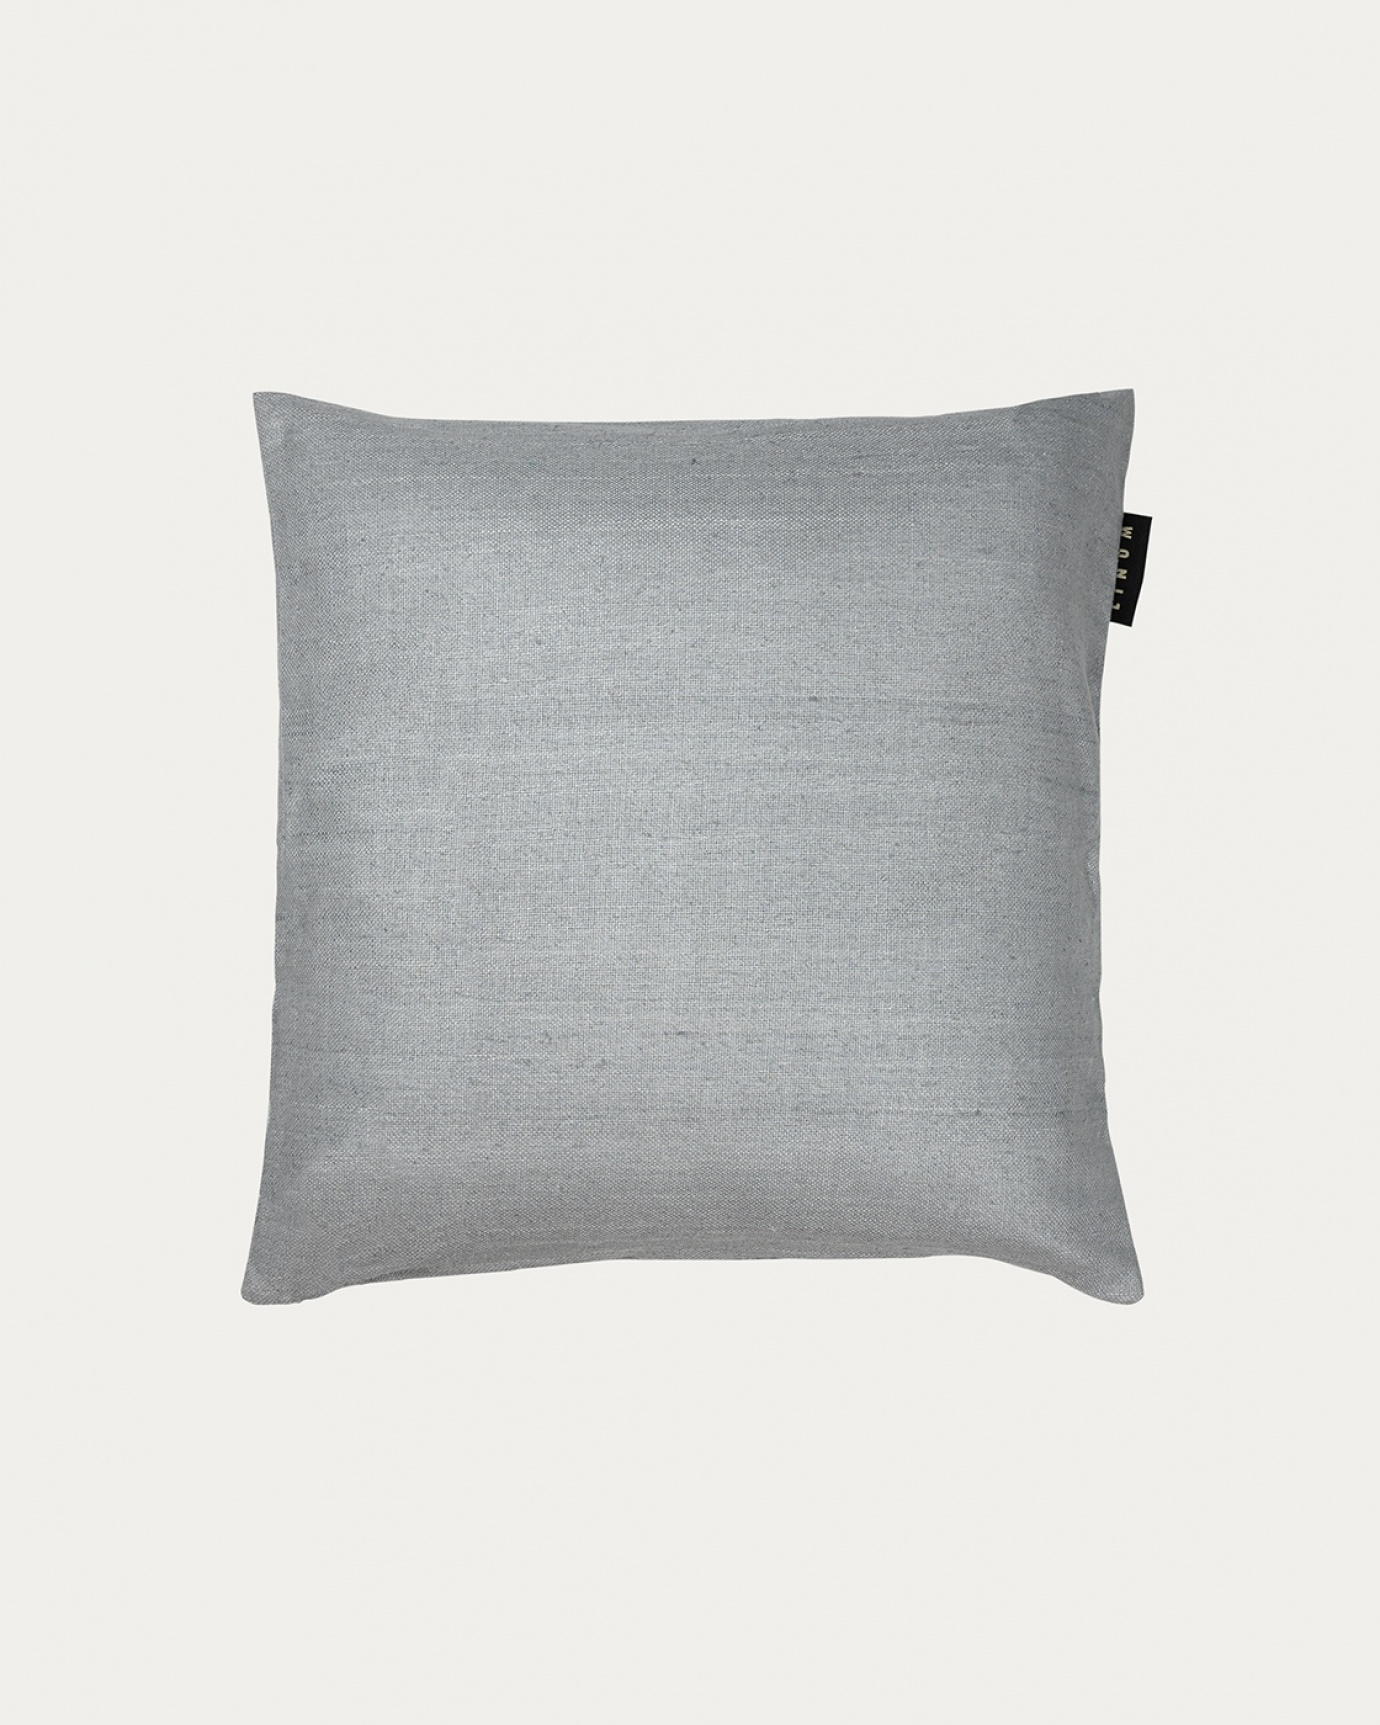 Product image light stone grey SETA cushion cover made of 100% raw silk that gives a nice lustre from LINUM DESIGN. Size 40x40 cm.